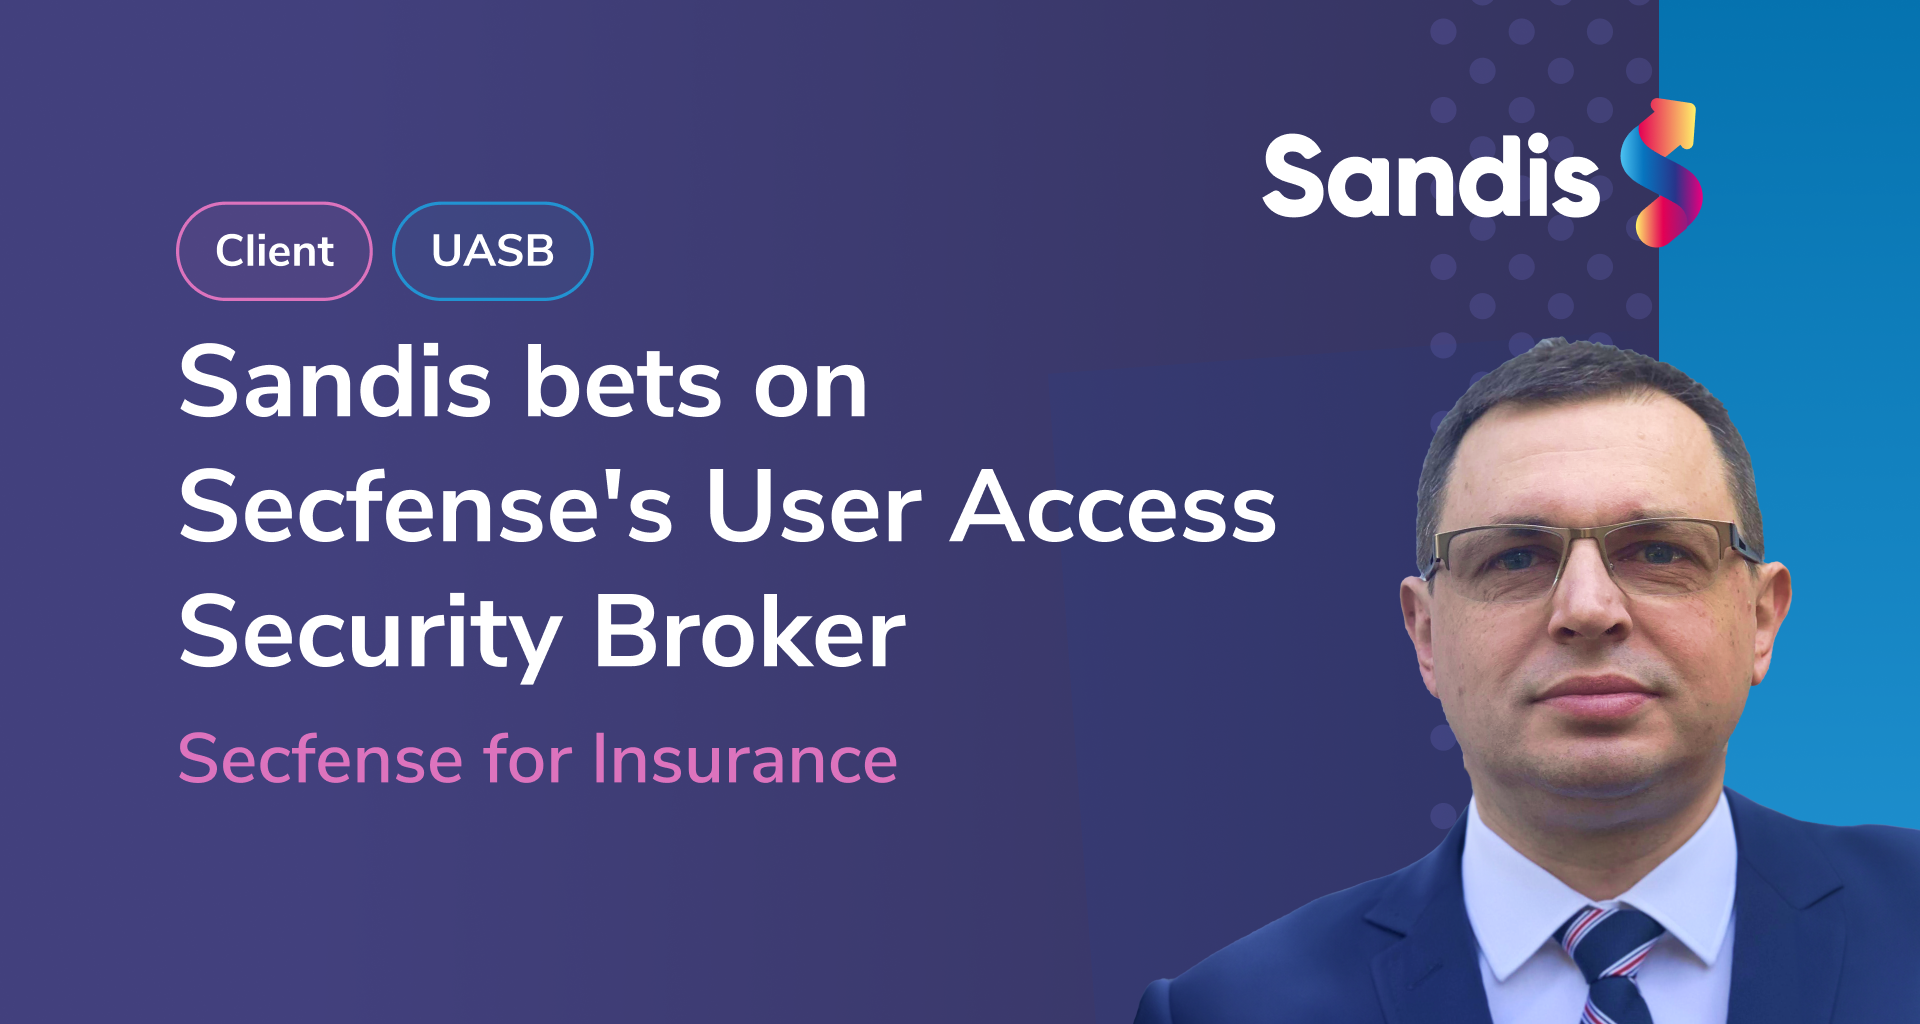 Sandis chooses Secfense and secures accounts of thousands of users